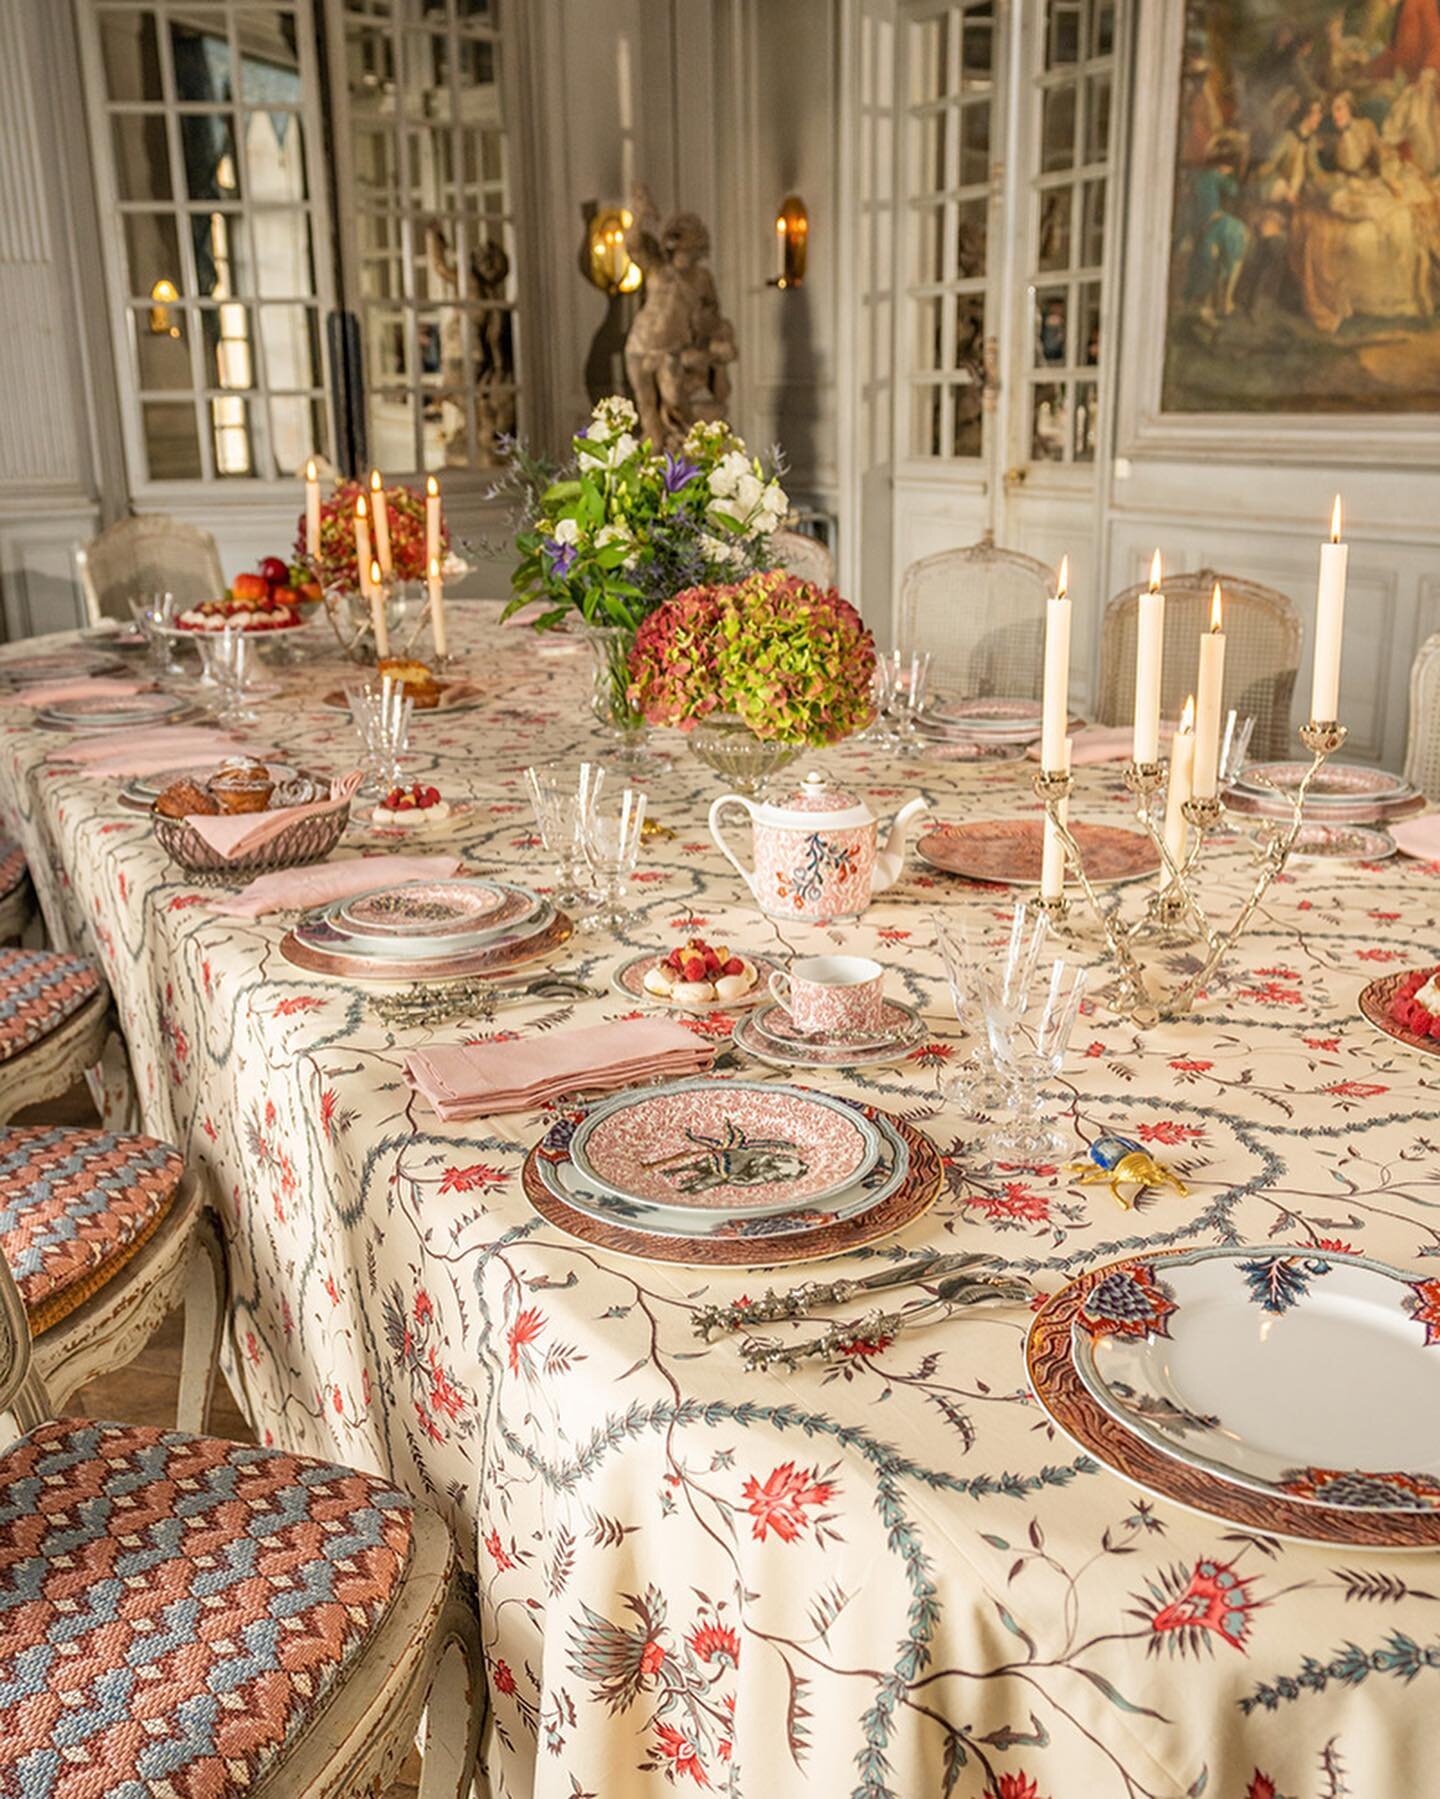 I had the chance to see the Braqueni&eacute; textiles and Bernardaud collection up close and personal at a recent Pierre Frey presentation&hellip;this beautiful tableware collaboration captures the spirit of classic French fabrics in fresh patterns w